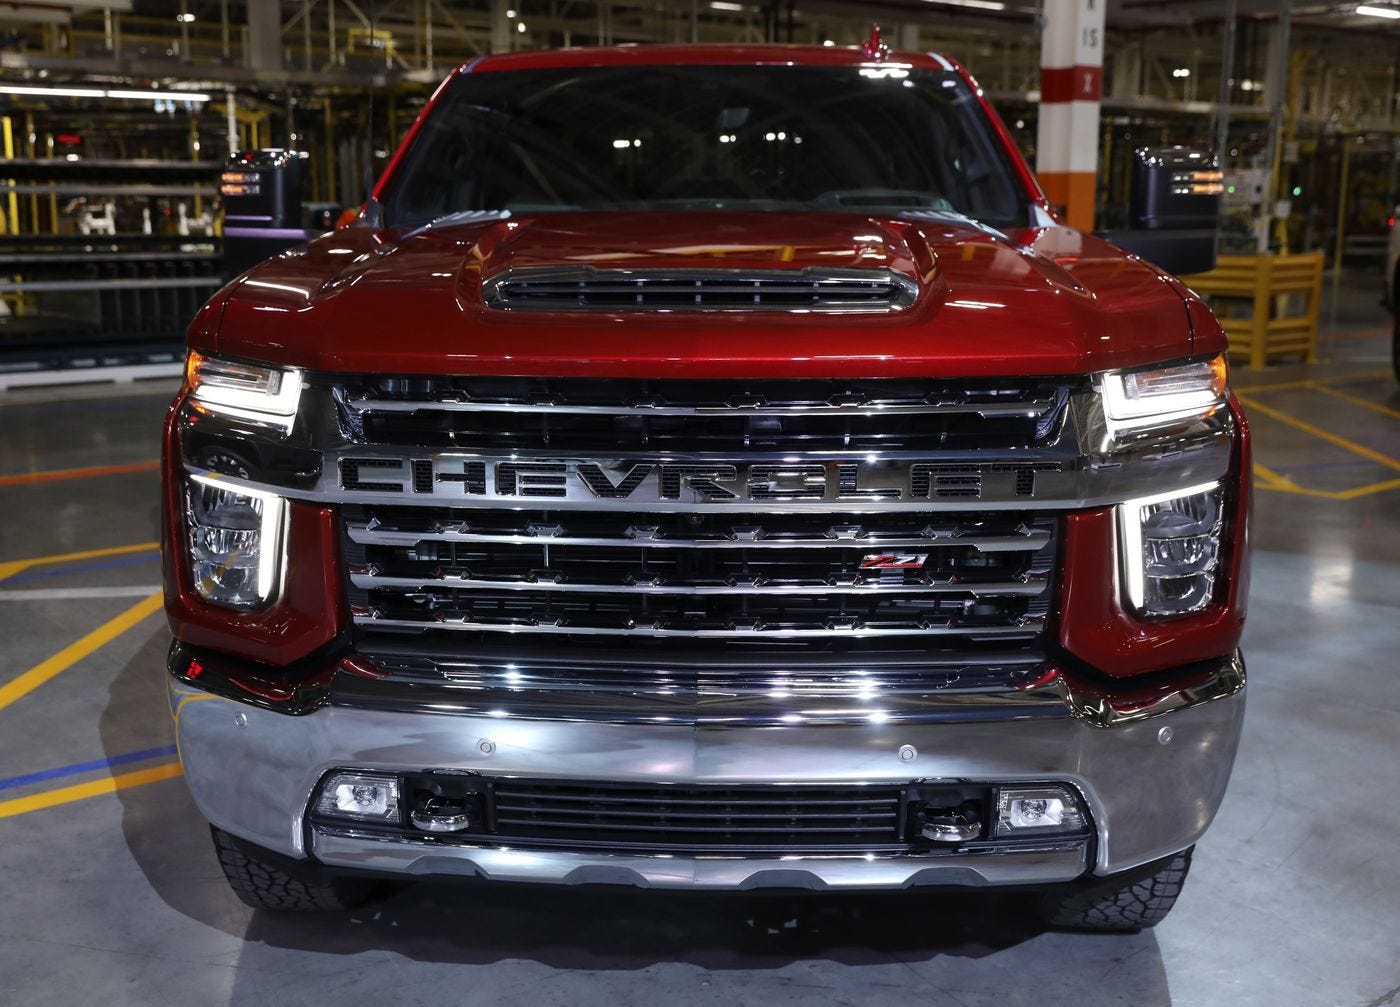 A 2020 Silverado HD pickup truck at the GM assembly plant in Flint, Michigan, in 2020. Owners of vehicles like this that weigh more than 6,000 pounds will face additional fees in Washington, D.C.&nbsp;